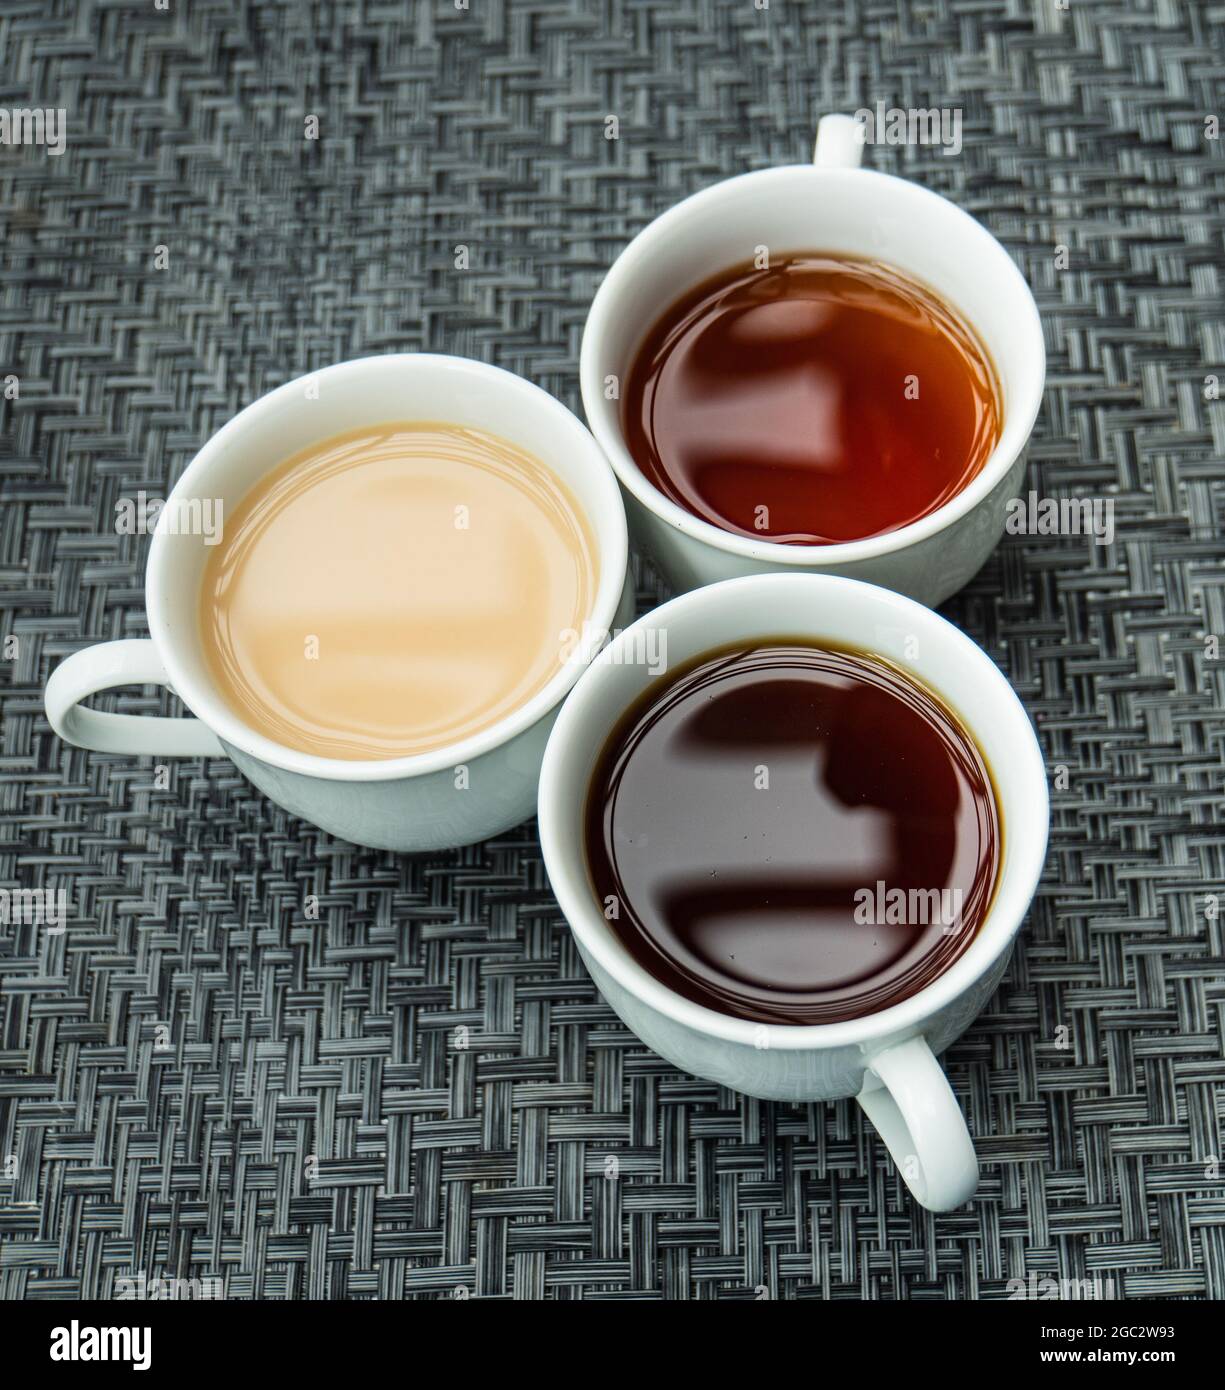 3 cups of tea: weak, strong or with milk Stock Photo